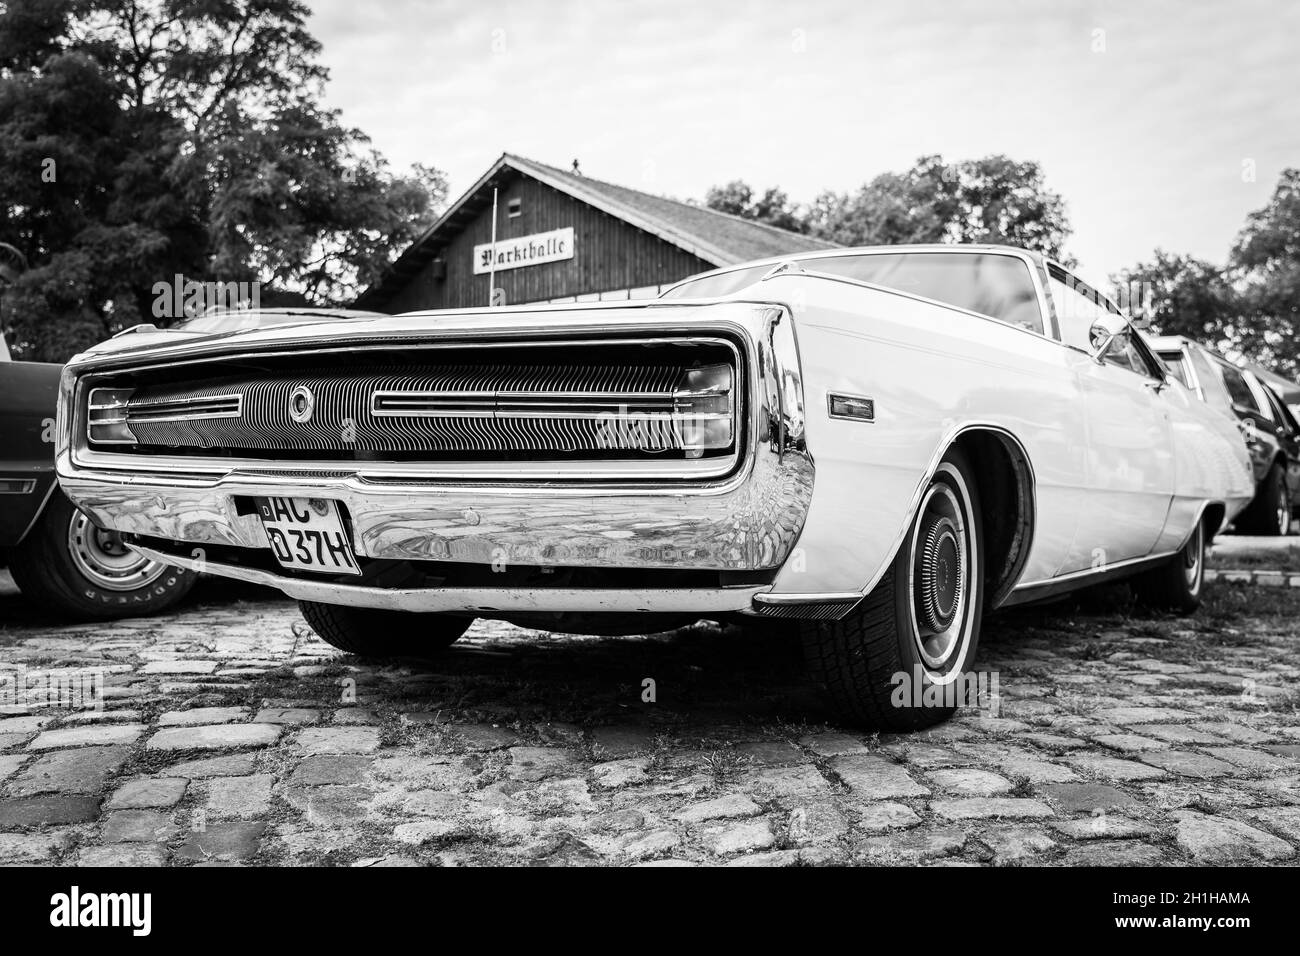 DIEDERSDORF, GERMANY - AUGUST 30, 2020: The full-size car Chrysler 300 (Non-Letter Series), 1970. Black and white. The exhibition of 'US Car Classics' Stock Photo